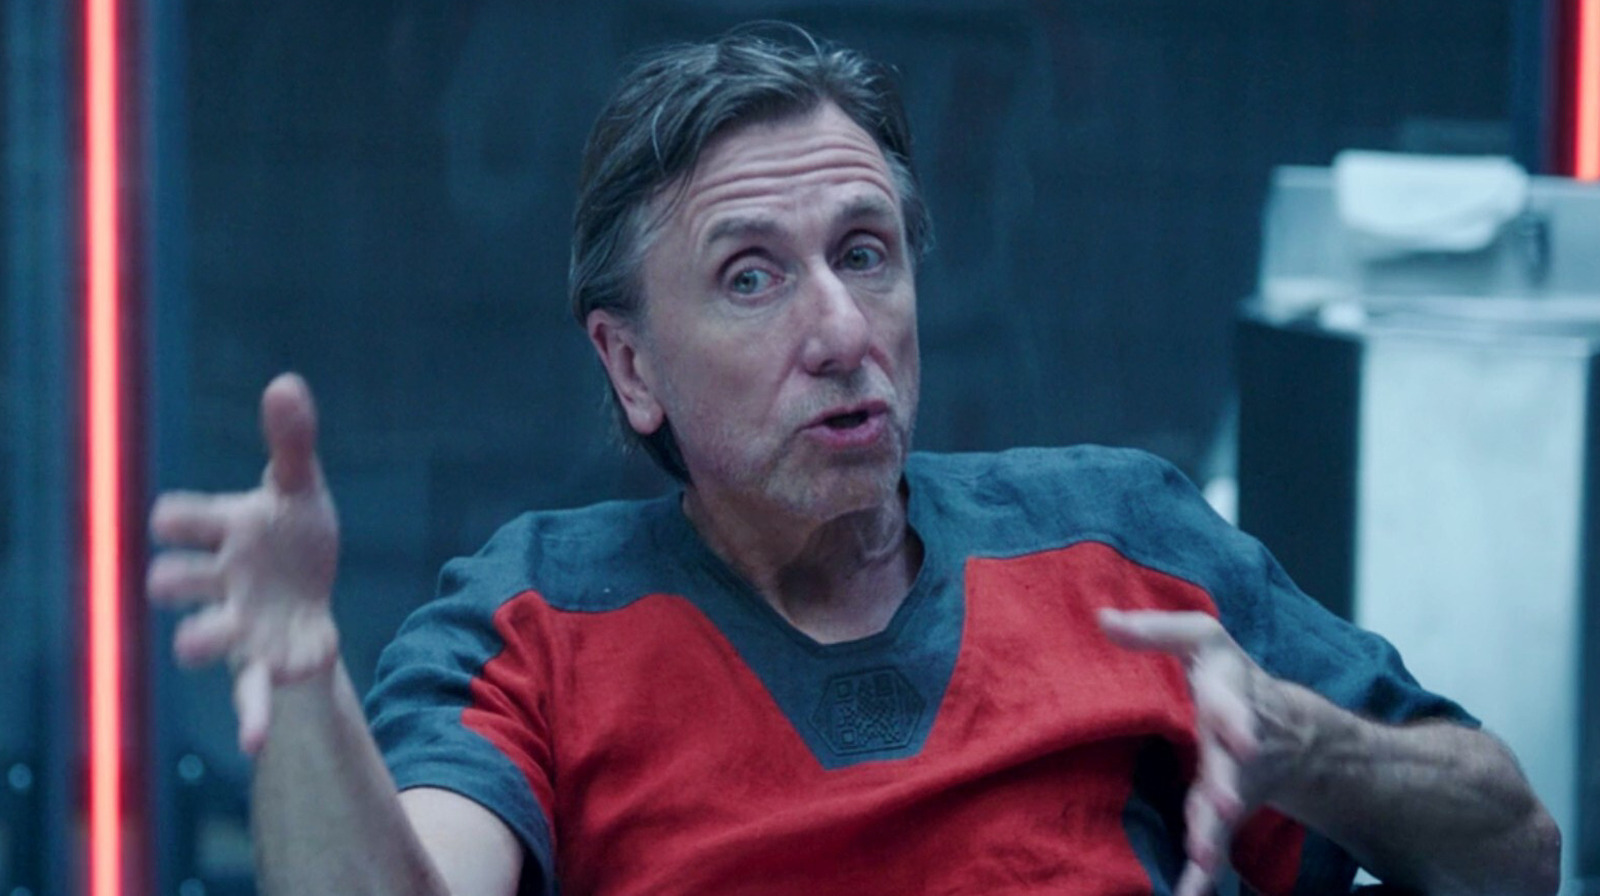 She-Hulk is Jaw-Dropping says Tim Roth - The Cine Geek